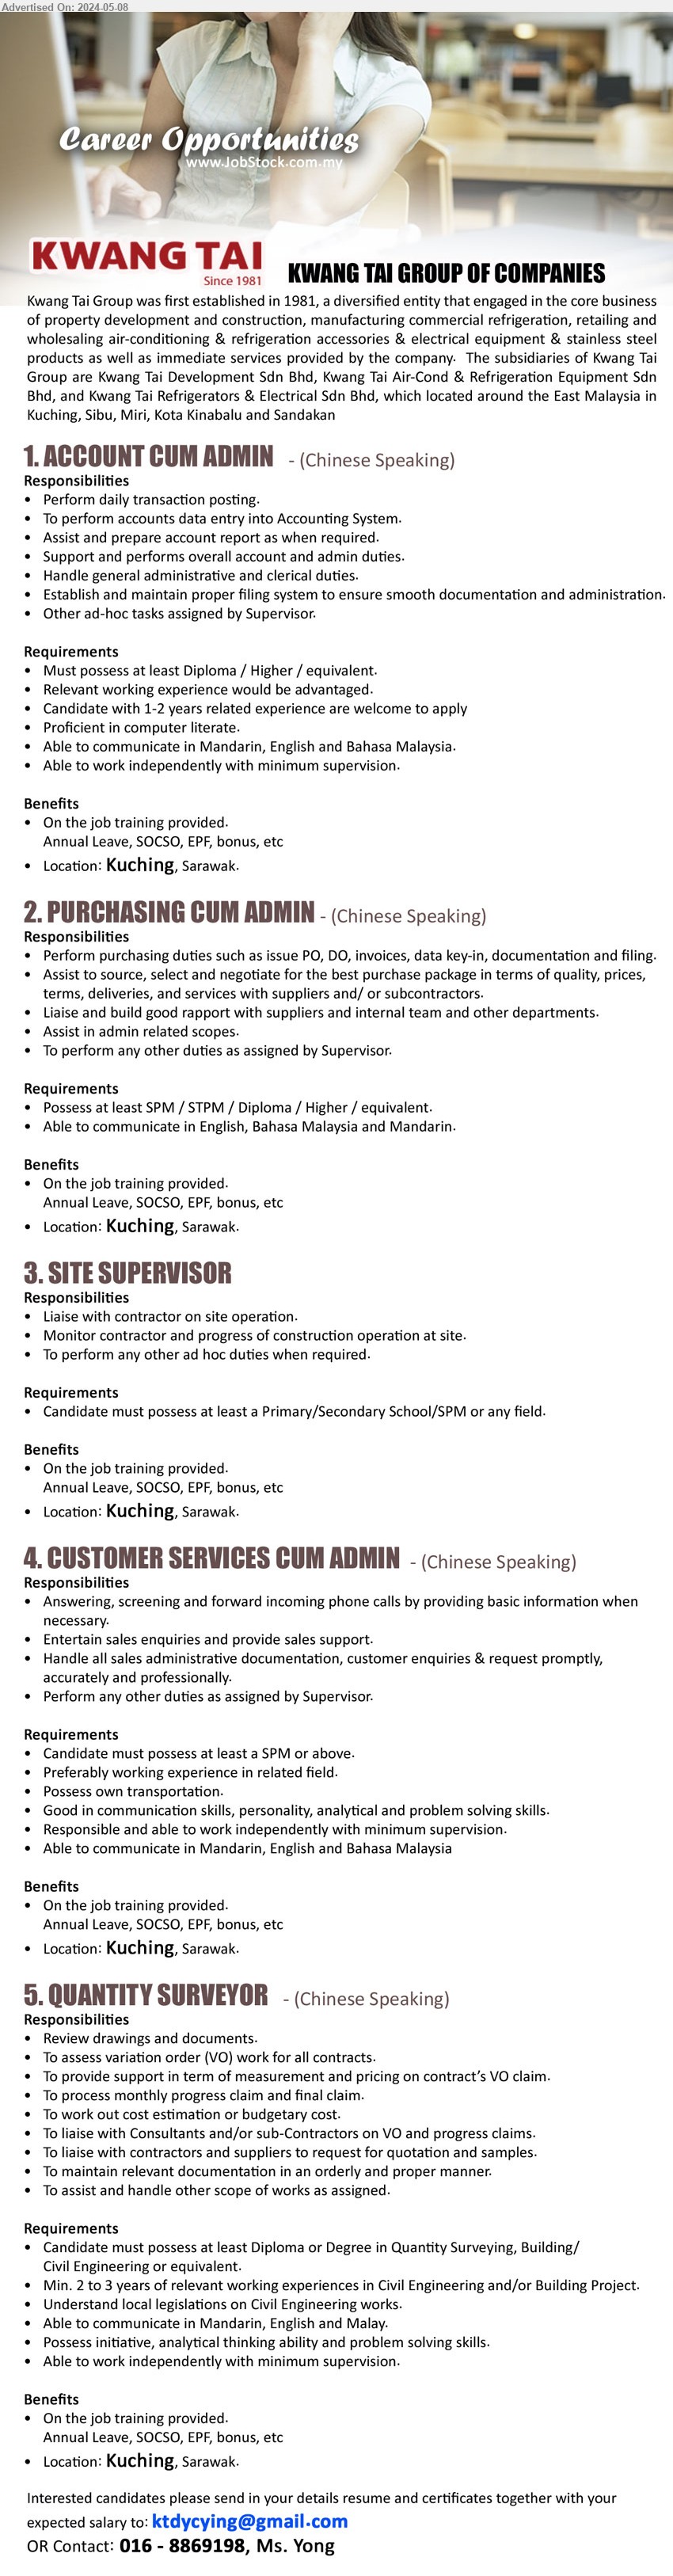 KWANG TAI GROUP - 1. ACCOUNT CUM ADMIN  (Kuching), Diploma / Higher, 1-2 yrs. exp., Proficient in computer literate.,...
2. PURCHASING CUM ADMIN  (Kuching),  SPM / STPM / Diploma / Higher, Perform purchasing duties such as issue PO, DO, invoices, data key-in, documentation and filing,...
3. SITE SUPERVISOR  (Kuching),  Primary/Secondary School/SPM, Liaise with contractor on site operation,...
4. CUSTOMER SERVICES CUM ADMIN  (Kuching), SPM or above., Good in communication skills, personality, analytical and problem solving skills.,...
5. QUANTITY SURVEYOR (Kuching), Diploma or Degree in Quantity Surveying, Building/Civil Engineering,...
Call 016-8869198 / Email resume to ...